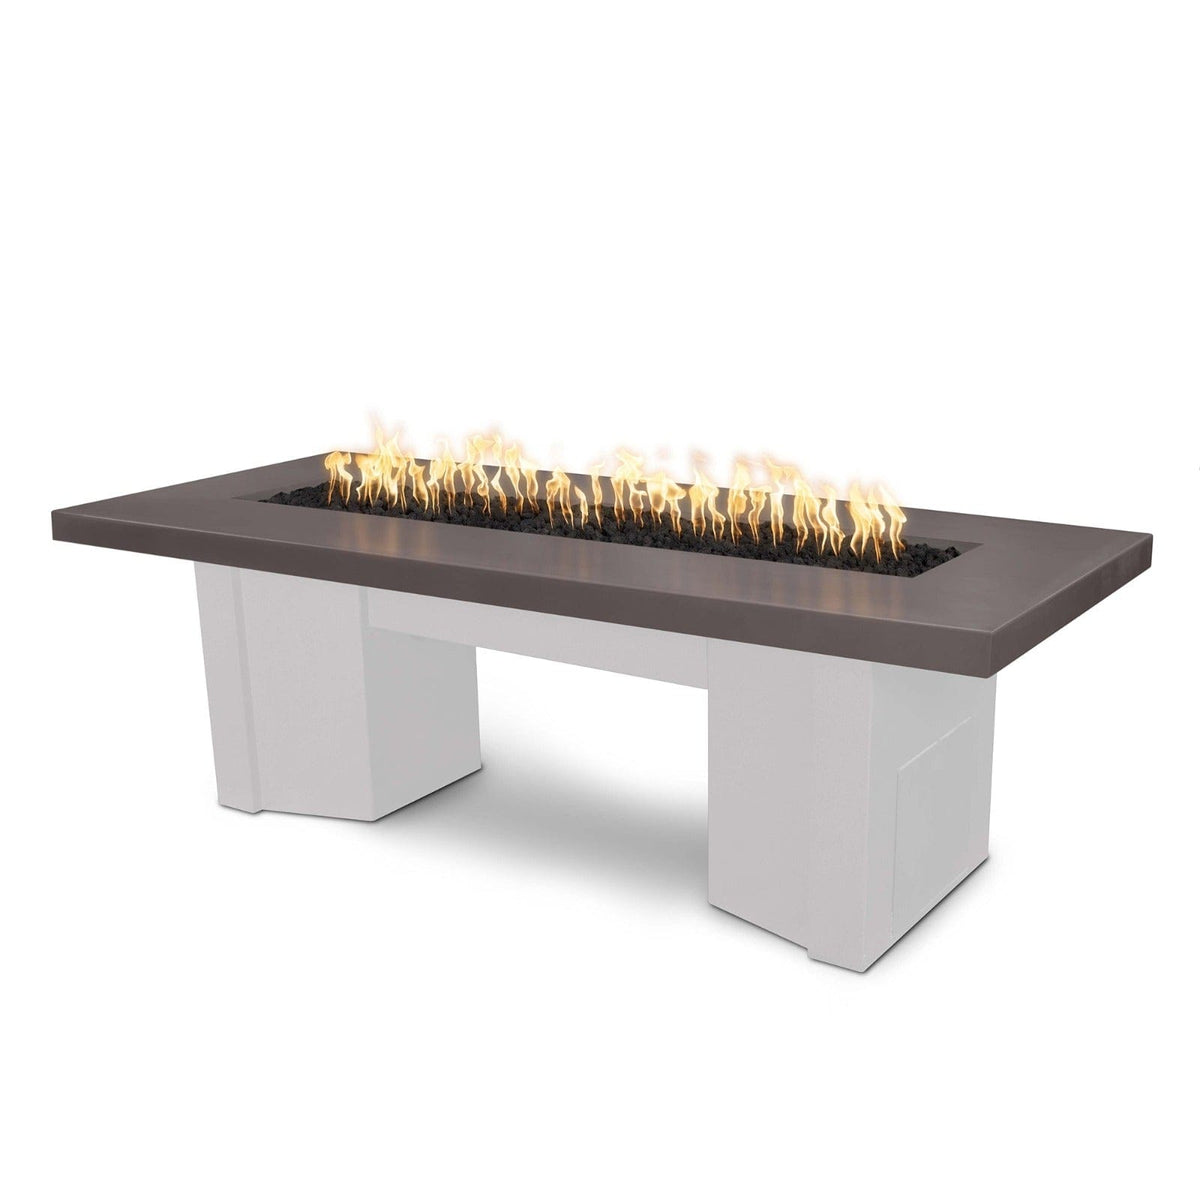 The Outdoor Plus Fire Features Chestnut (-CST) / White Powder Coated Steel (-WHT) The Outdoor Plus 78&quot; Alameda Fire Table Smooth Concrete in Natural Gas - Flame Sense System with Push Button Spark Igniter / OPT-ALMGFRC78FSEN-NG